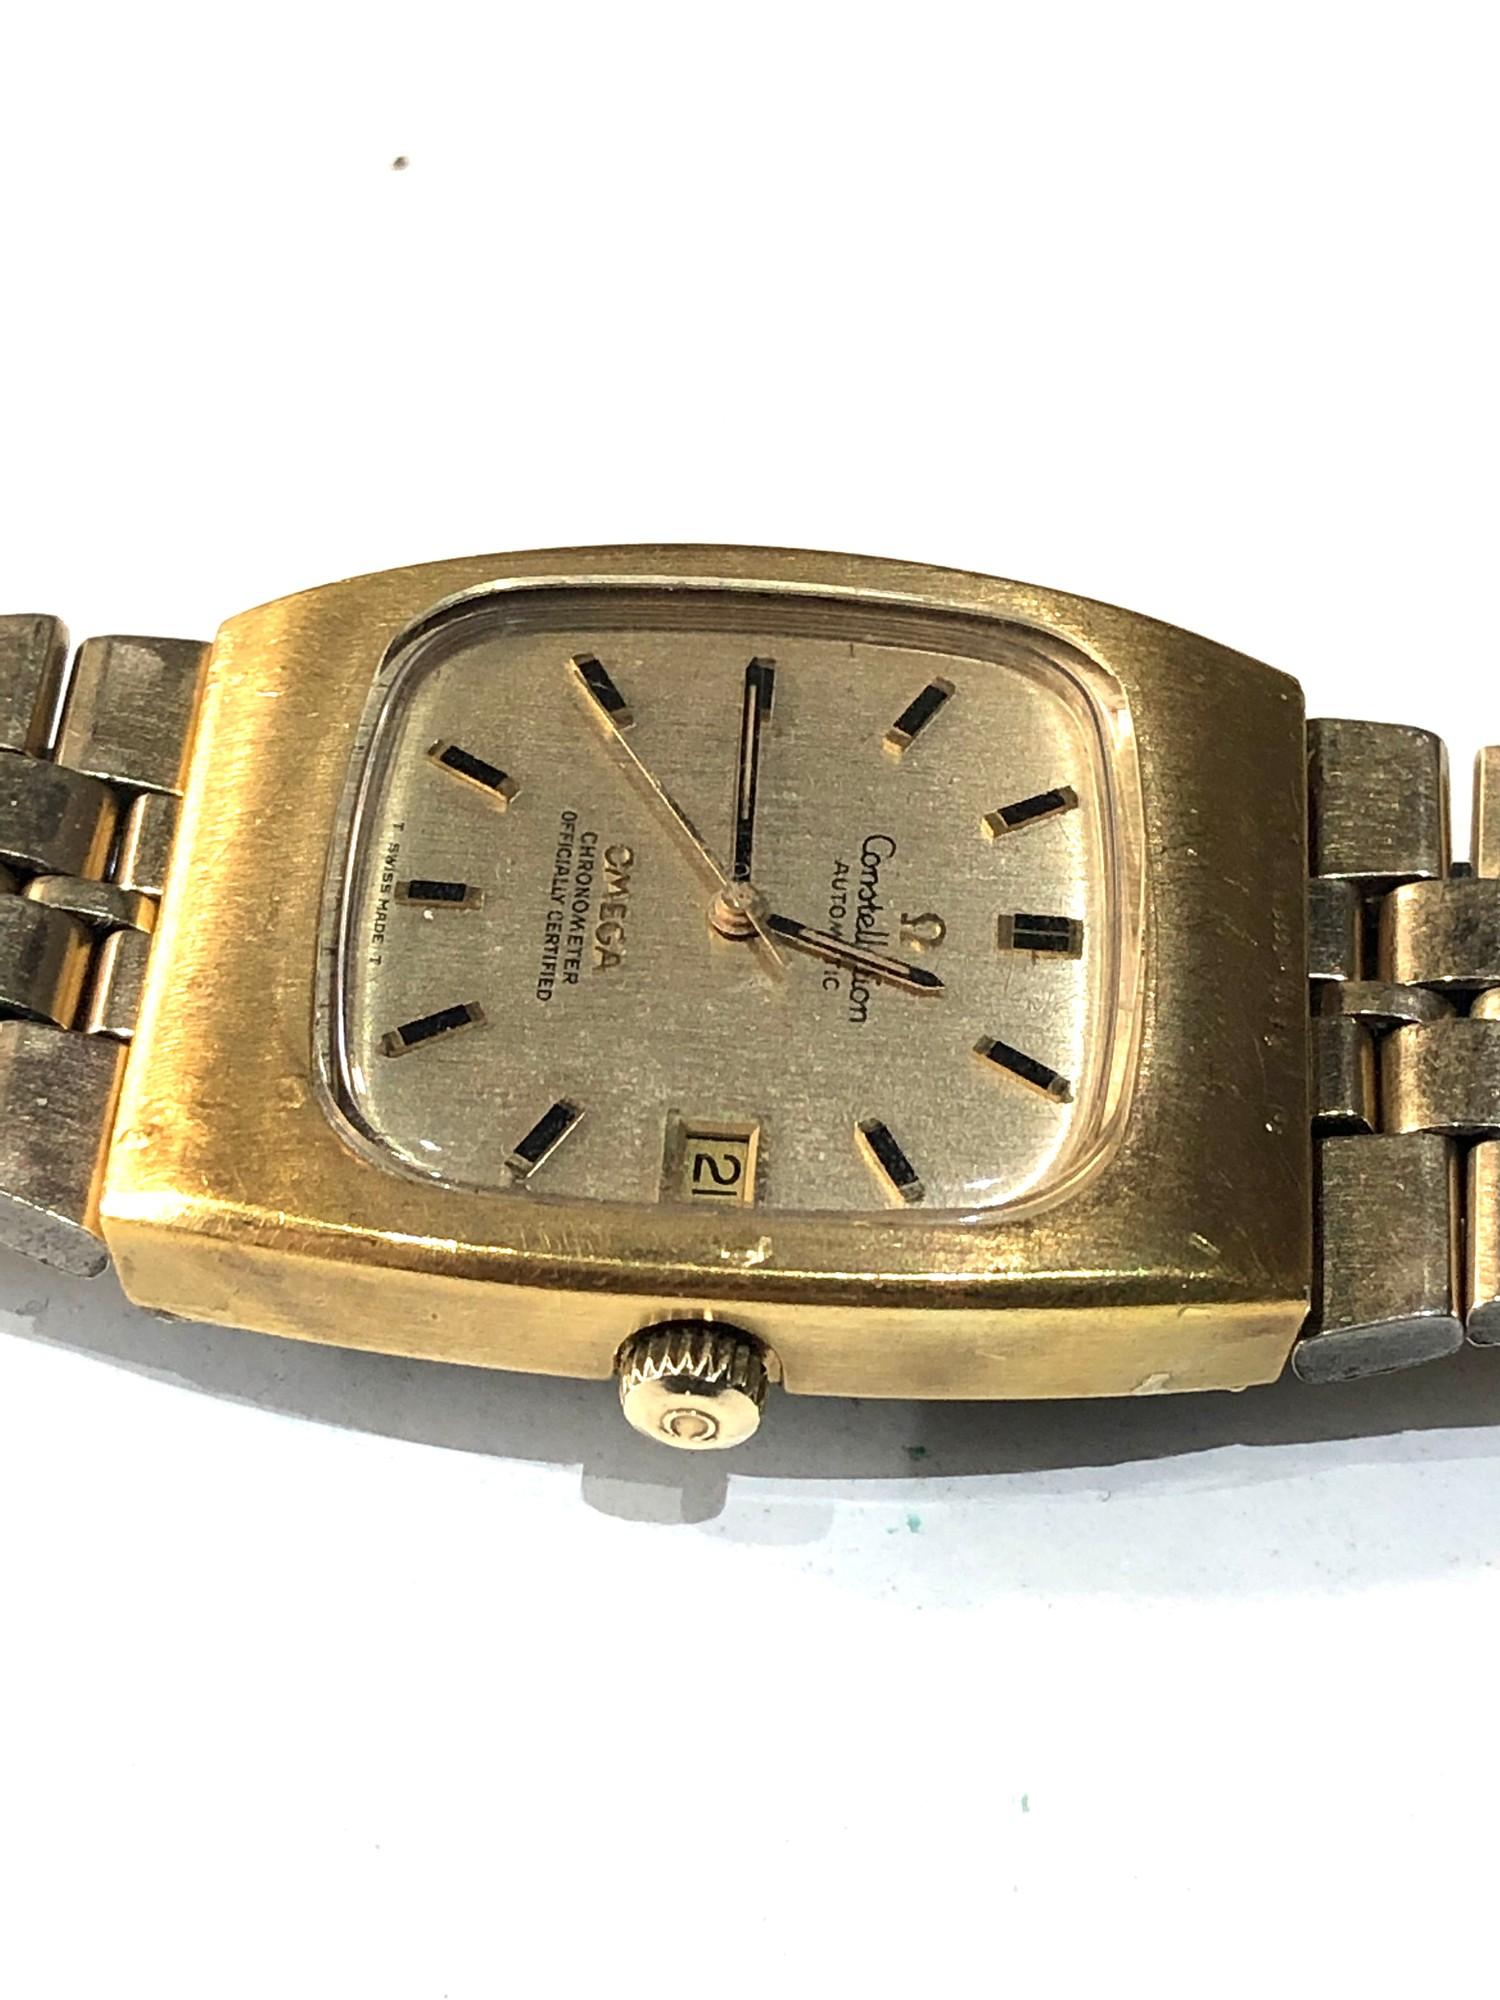 Vintage Omega Constellation Automatic chronometer Wristwatch non working original strap - Image 3 of 5